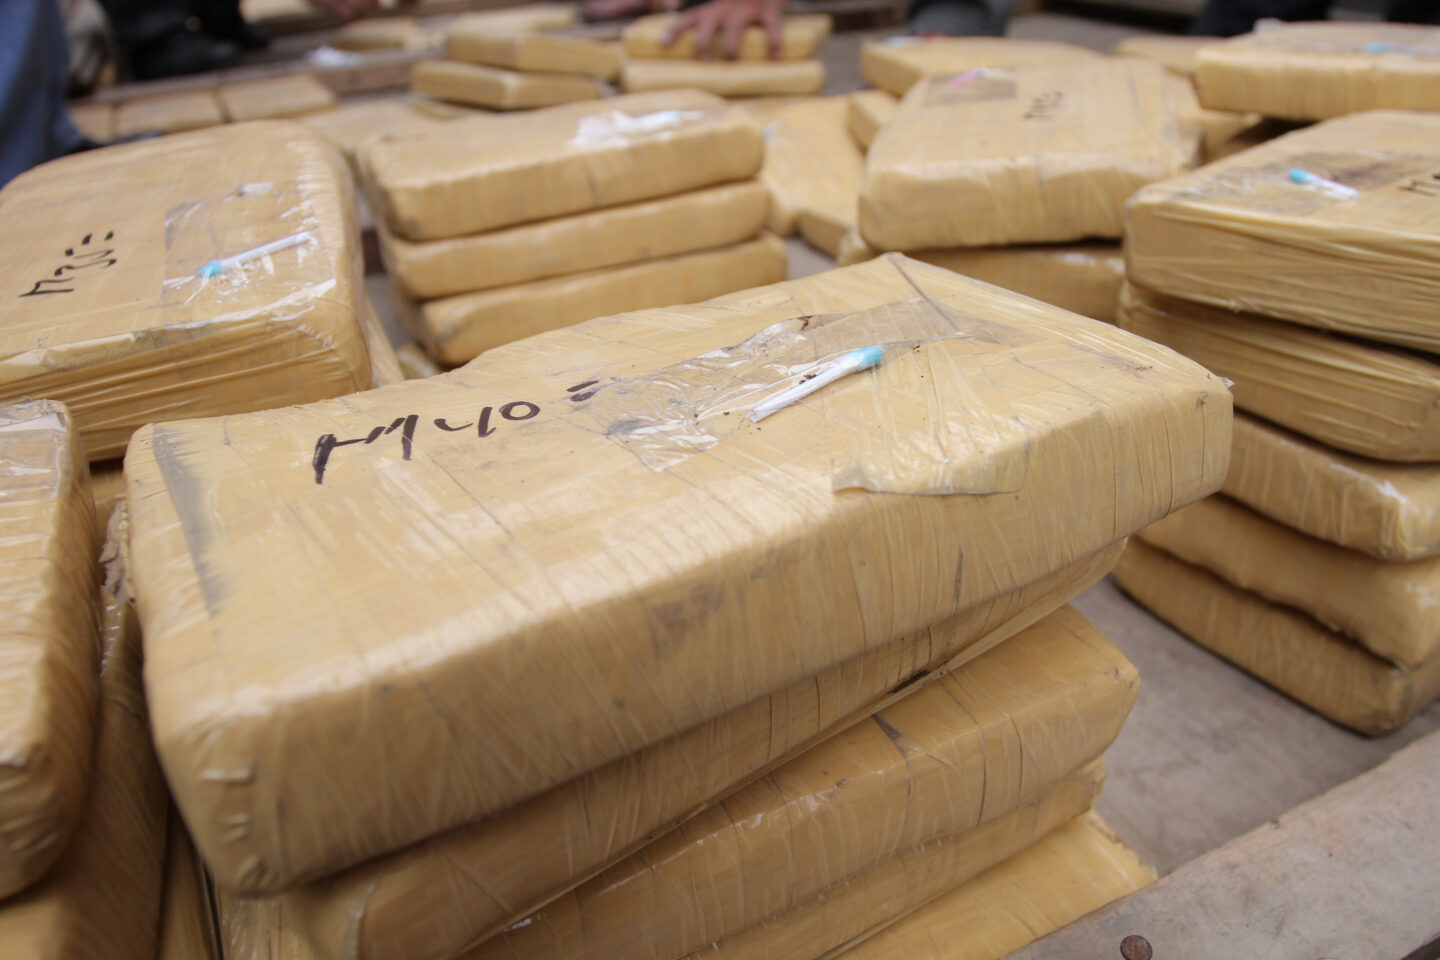 photo of Sweden Authorities Seize 1.4 Tons of Cocaine, ‘One of the Biggest’ Seizures Ever image